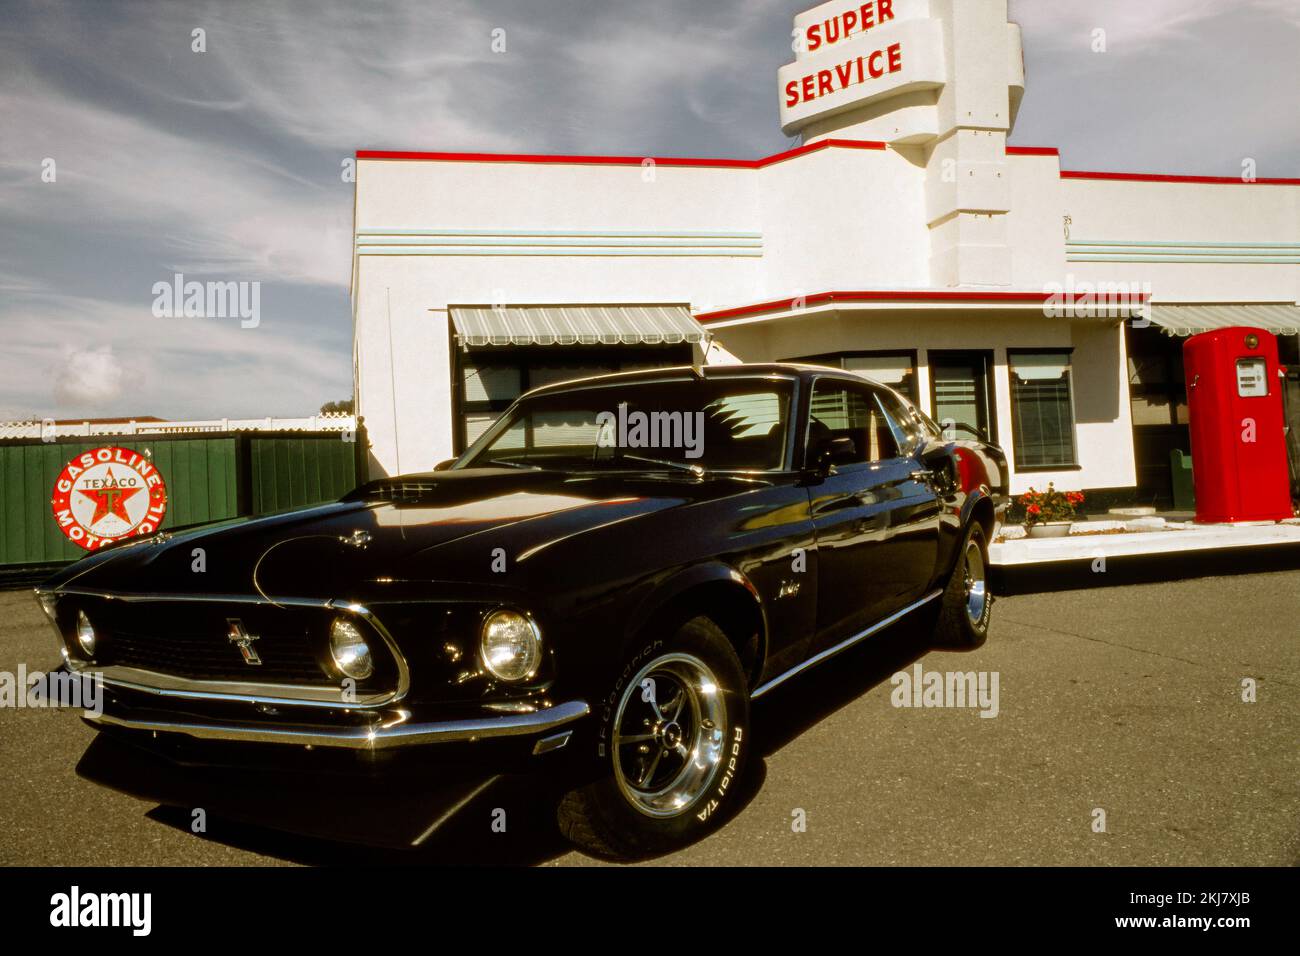 Vintage photograph of a 1969 Ford Mustang Fastback at a Texaco Service station Stock Photo